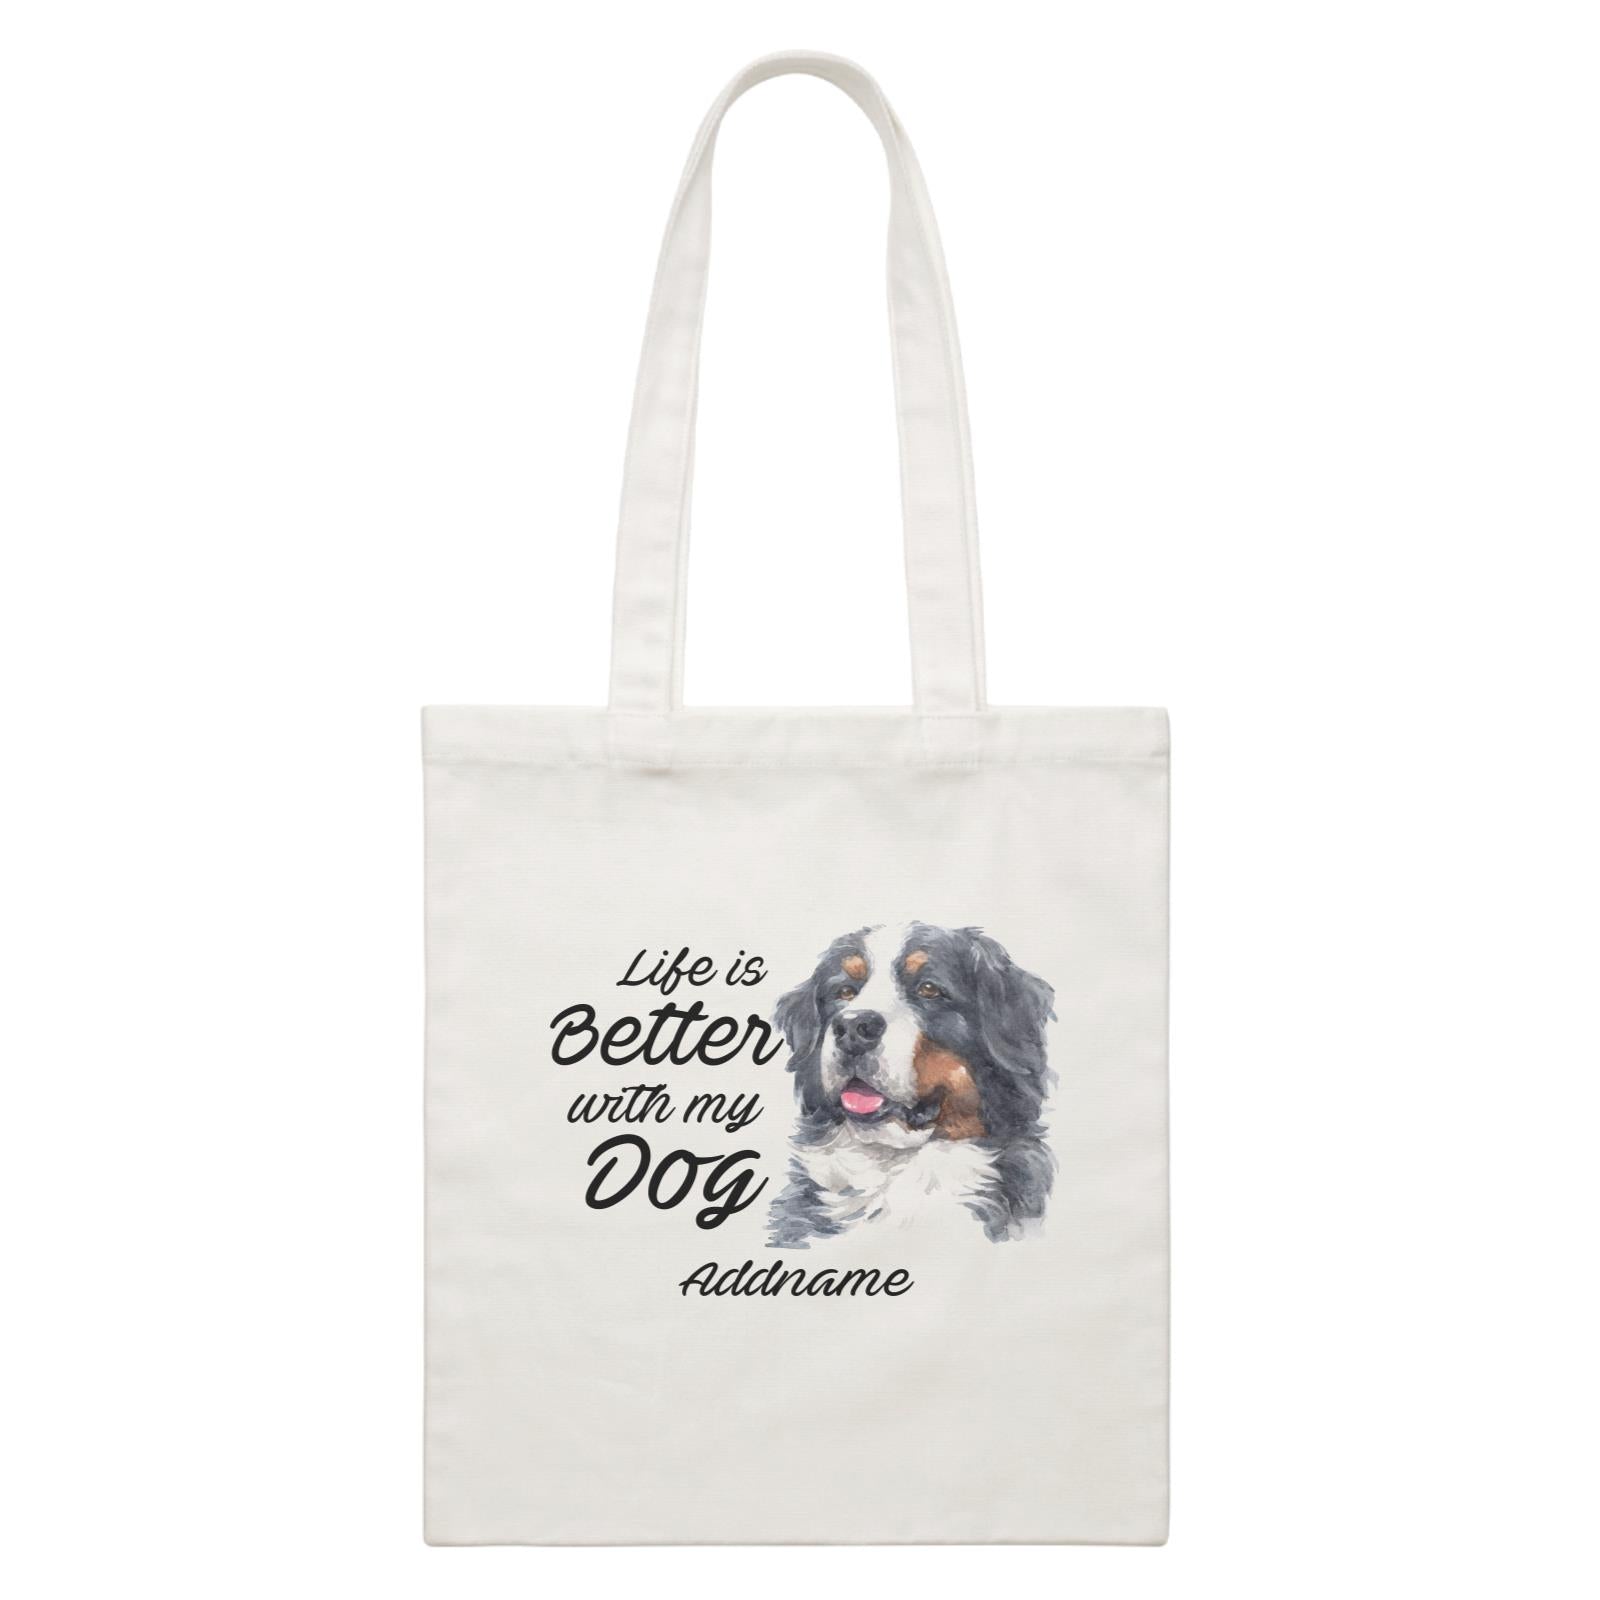 Watercolor Life is Better With My Dog Bernese Mountain Dog Addname White Canvas Bag